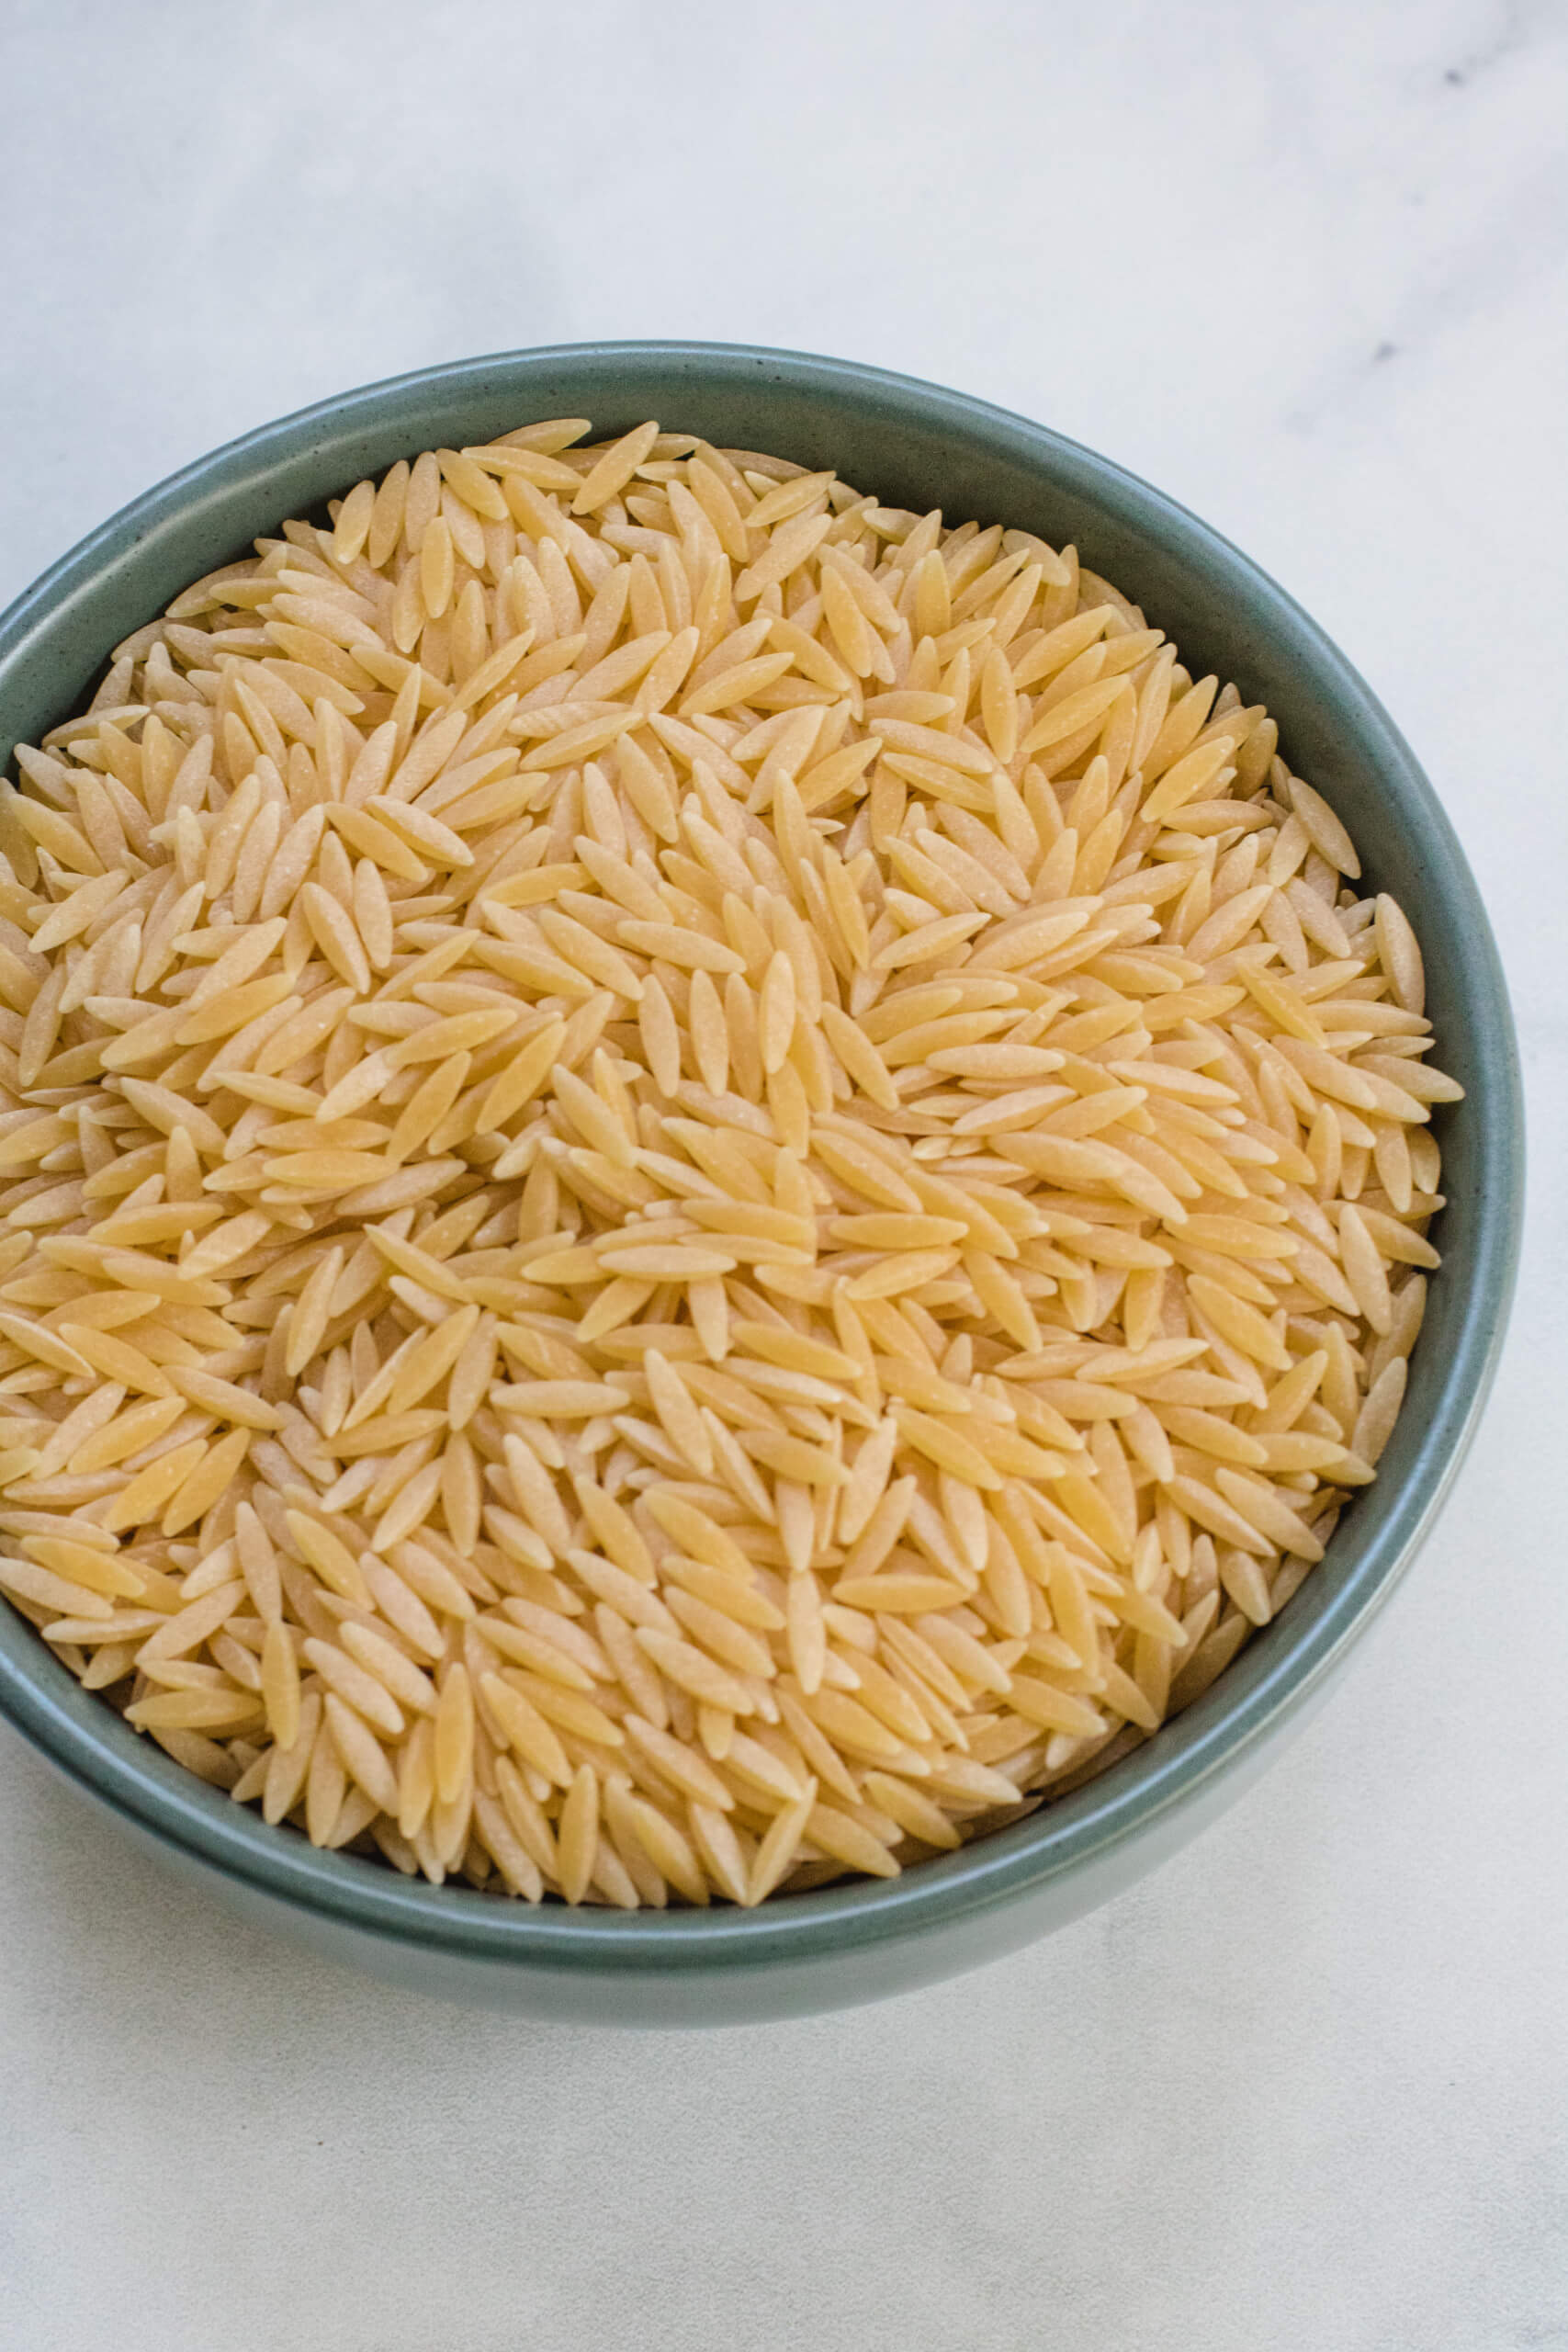 Orzo in a green bowl on a white background